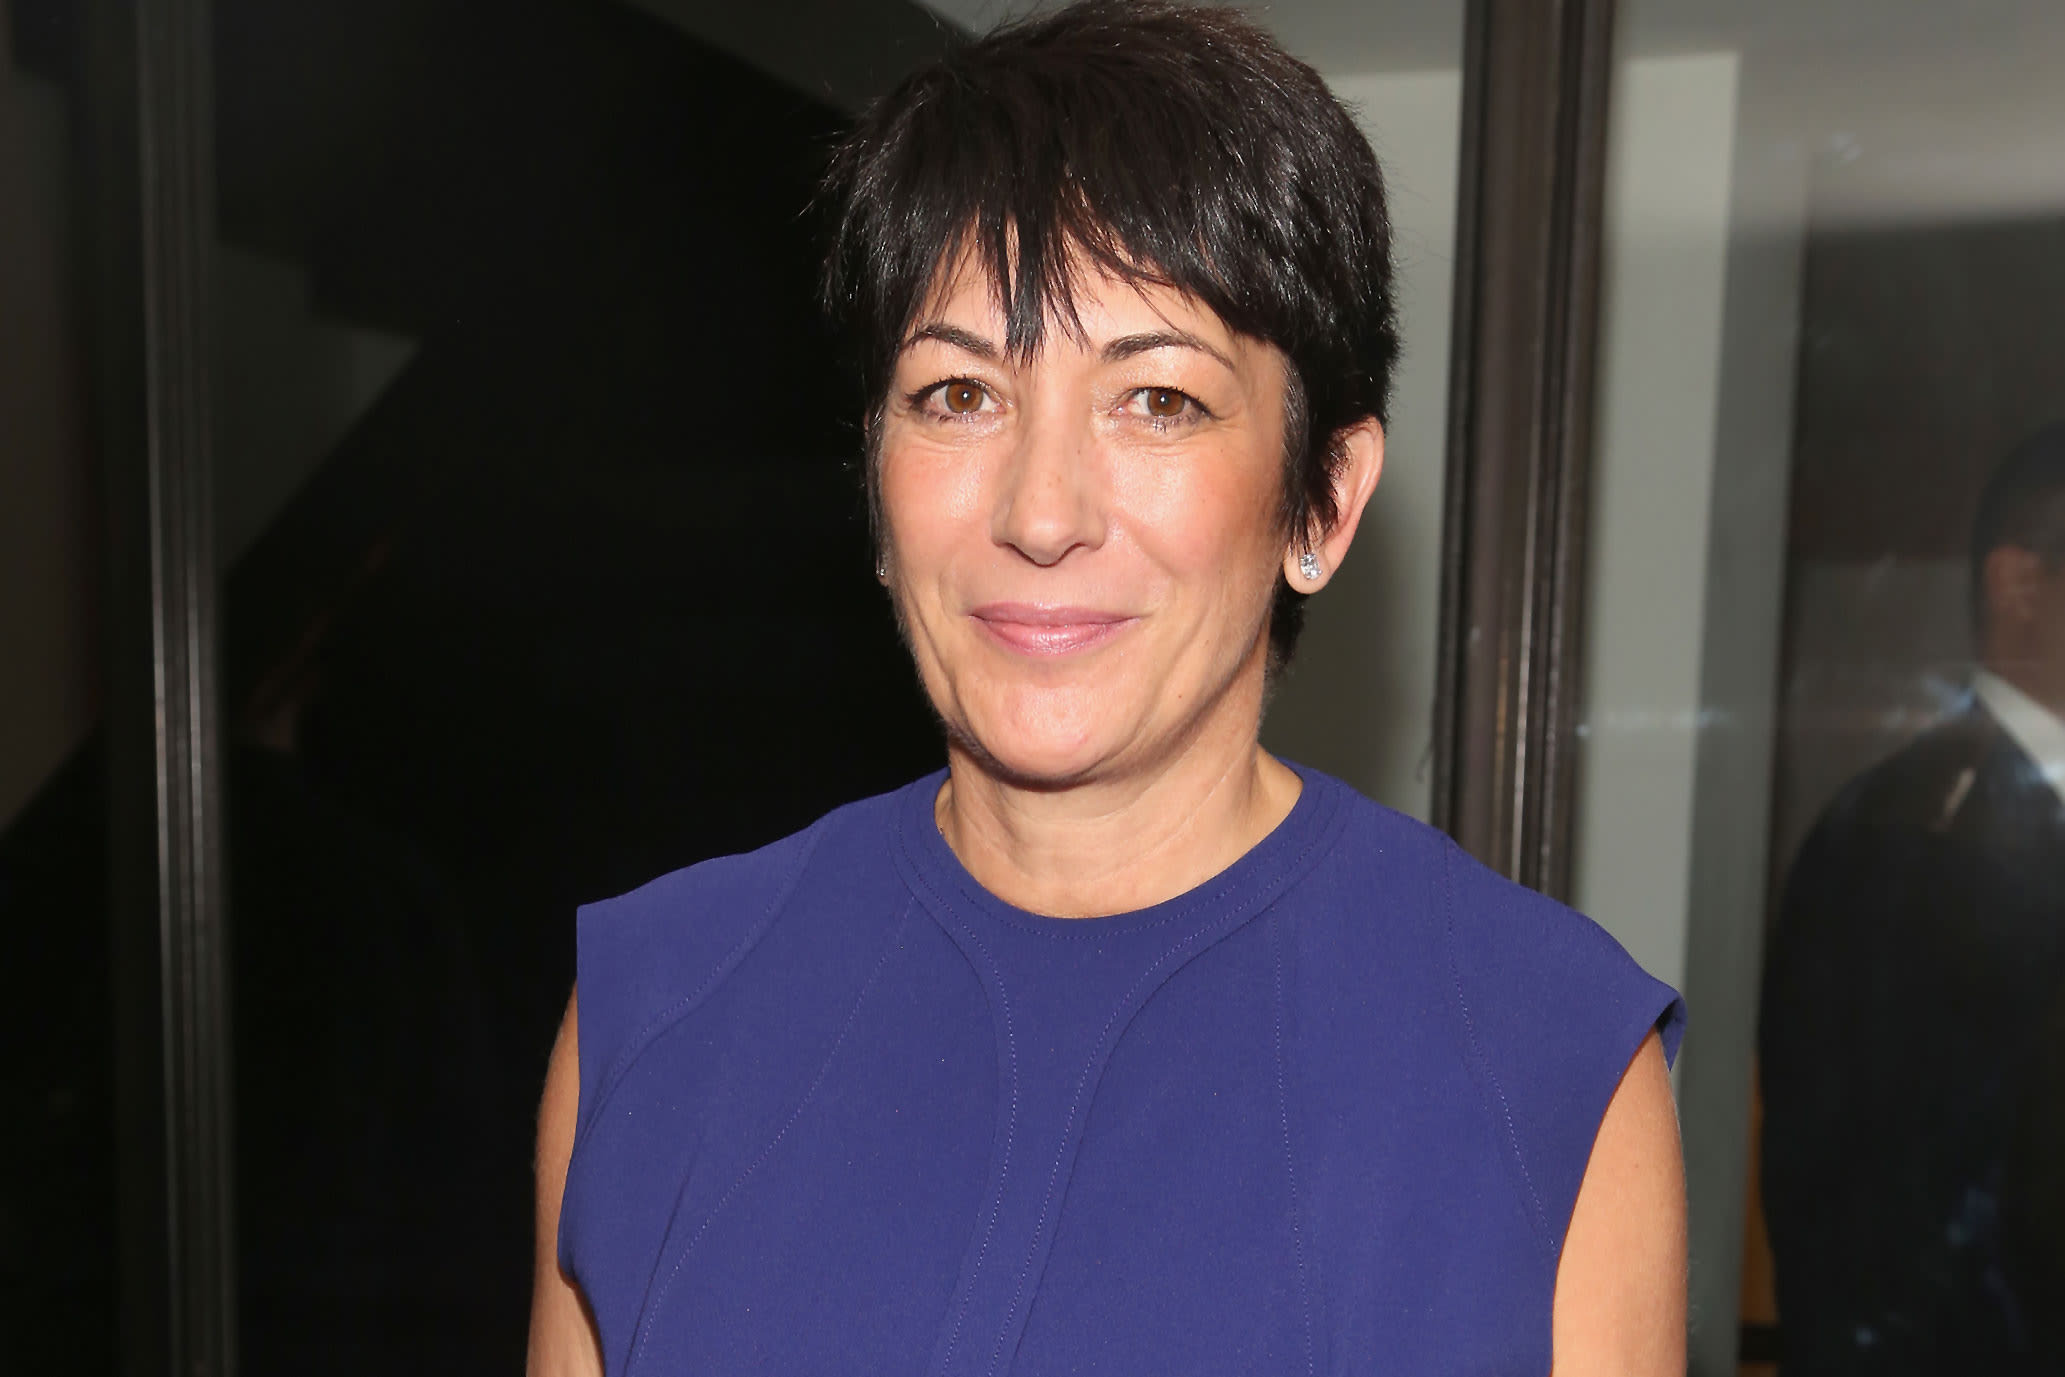 Ghislaine Maxwell will not testify in sex case related to Jeffrey Epstein – CNBC